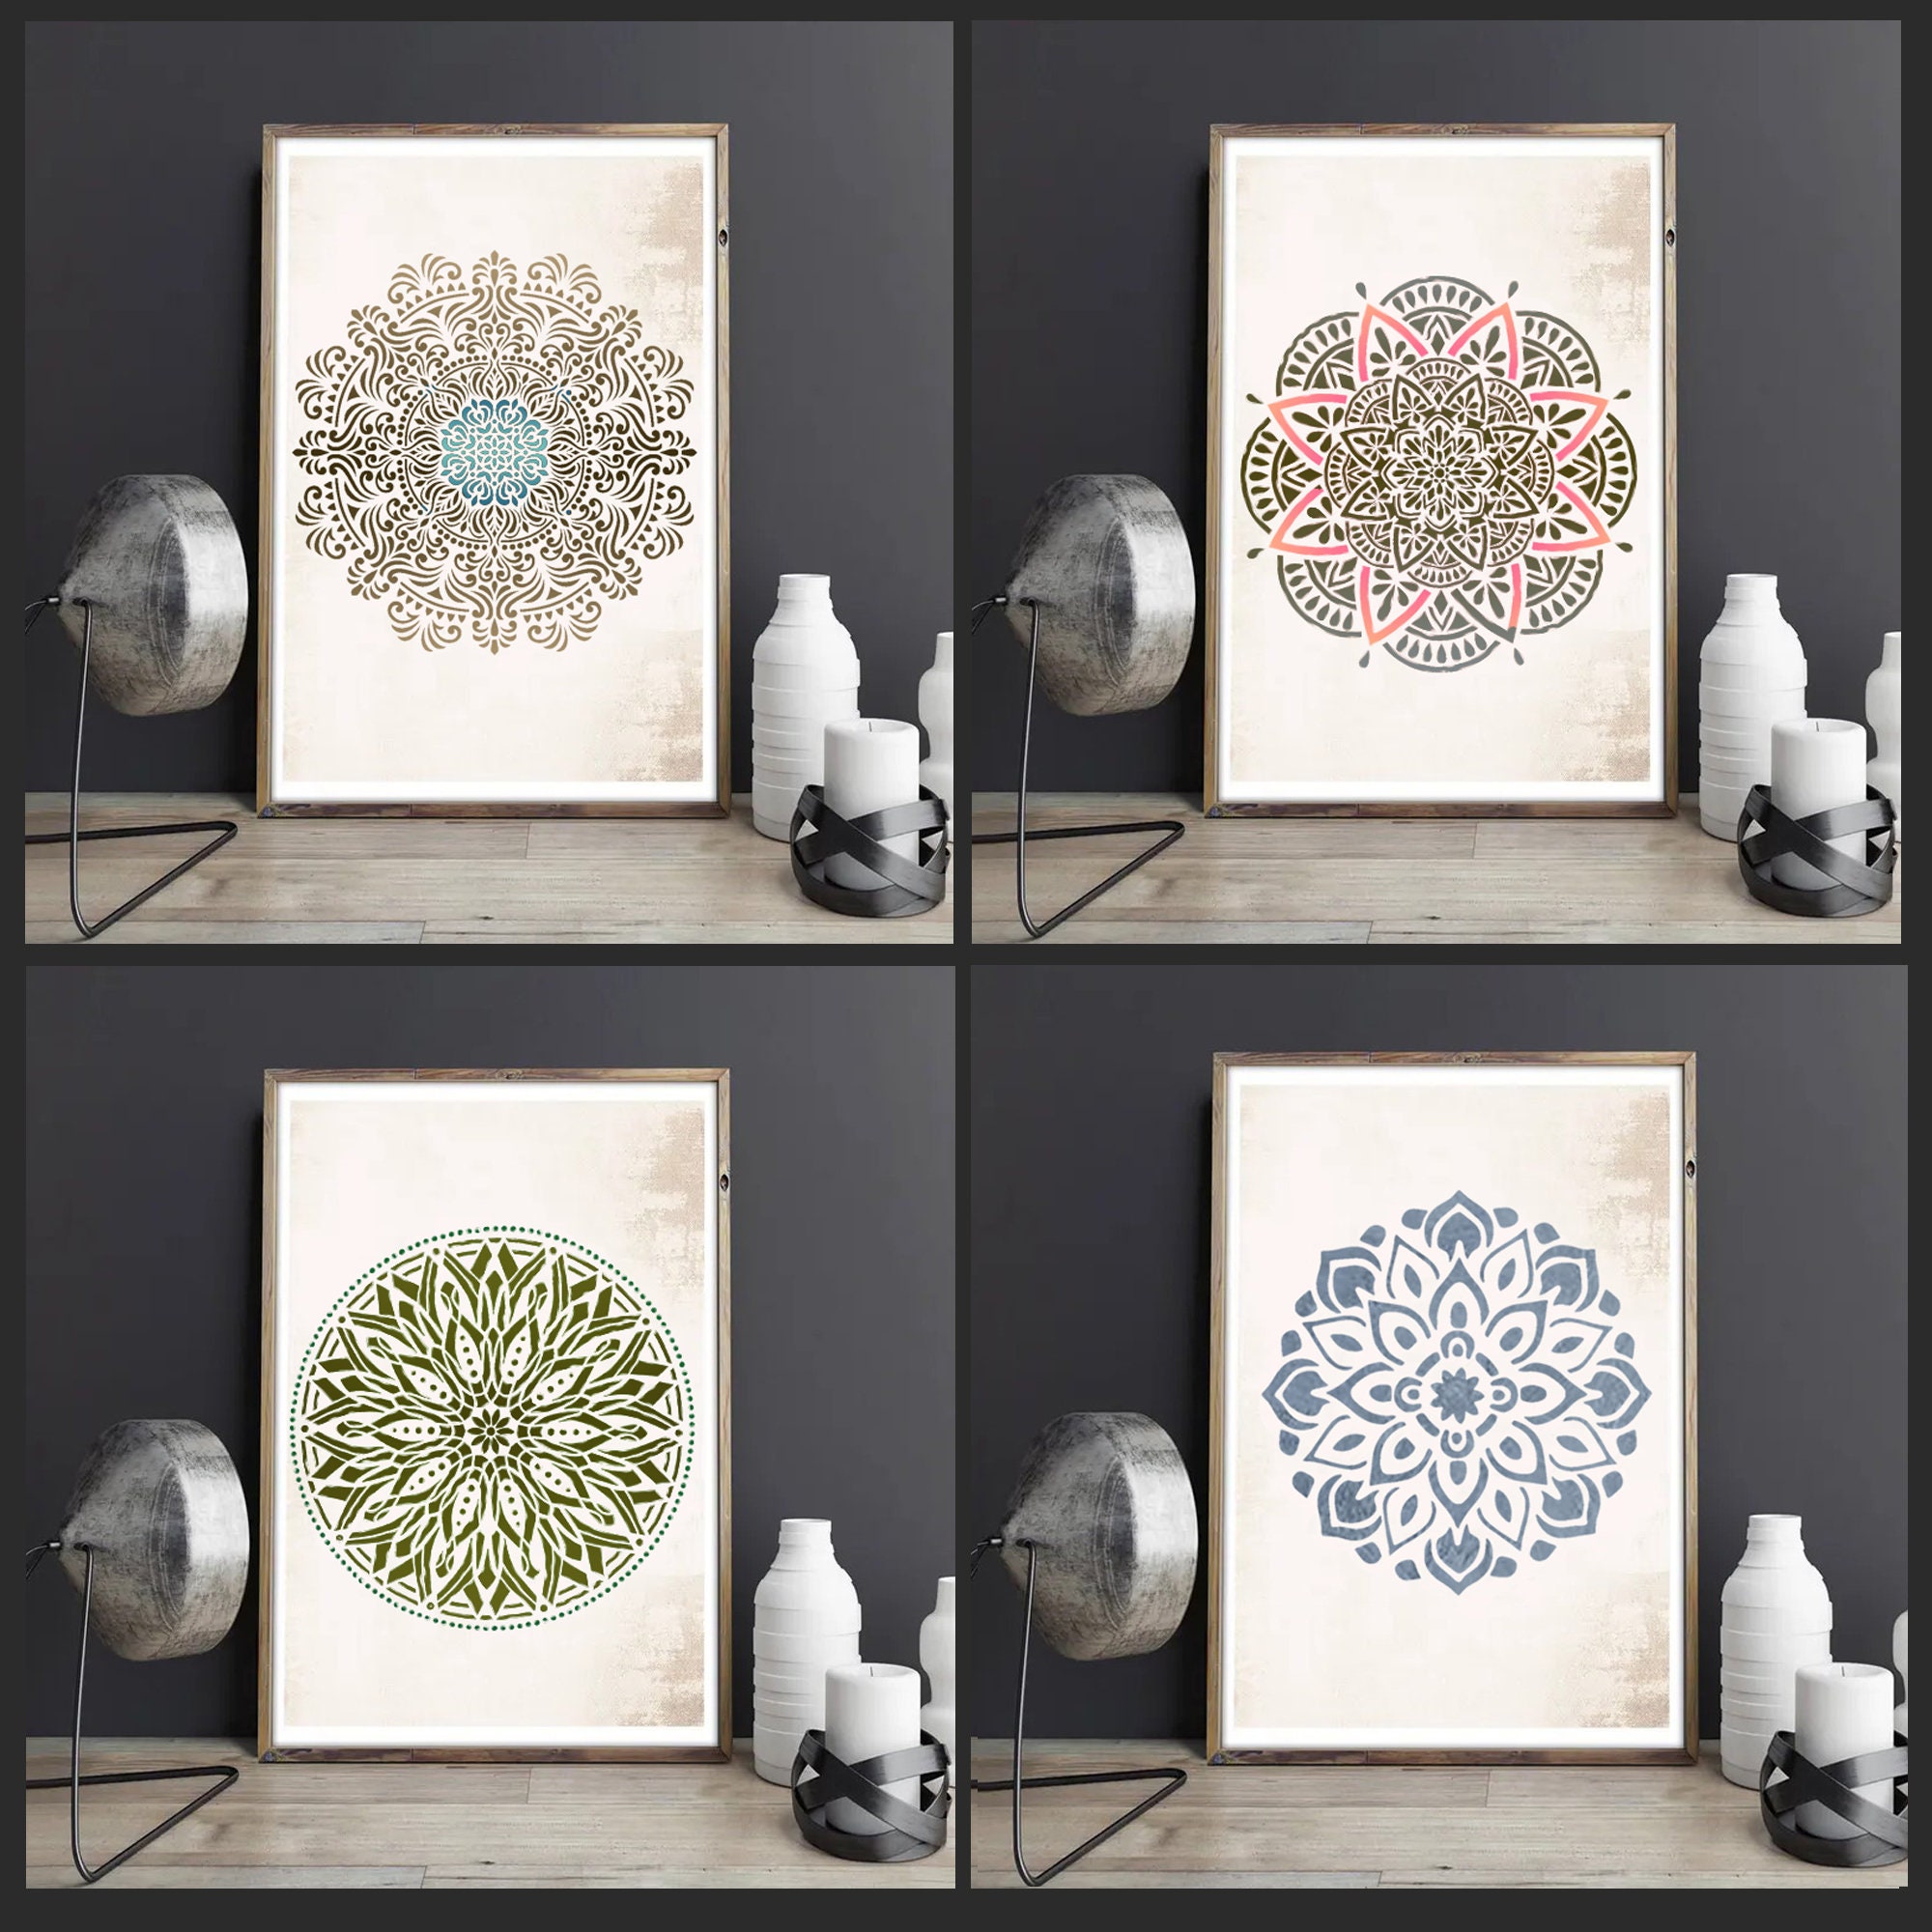 Large Mandala Stencil 12x12 Inch - 9 Pack Mandala Stencils Templates for  Painting on Floor, Reusable Pattern Stencils for Fabric, Wood, Tile